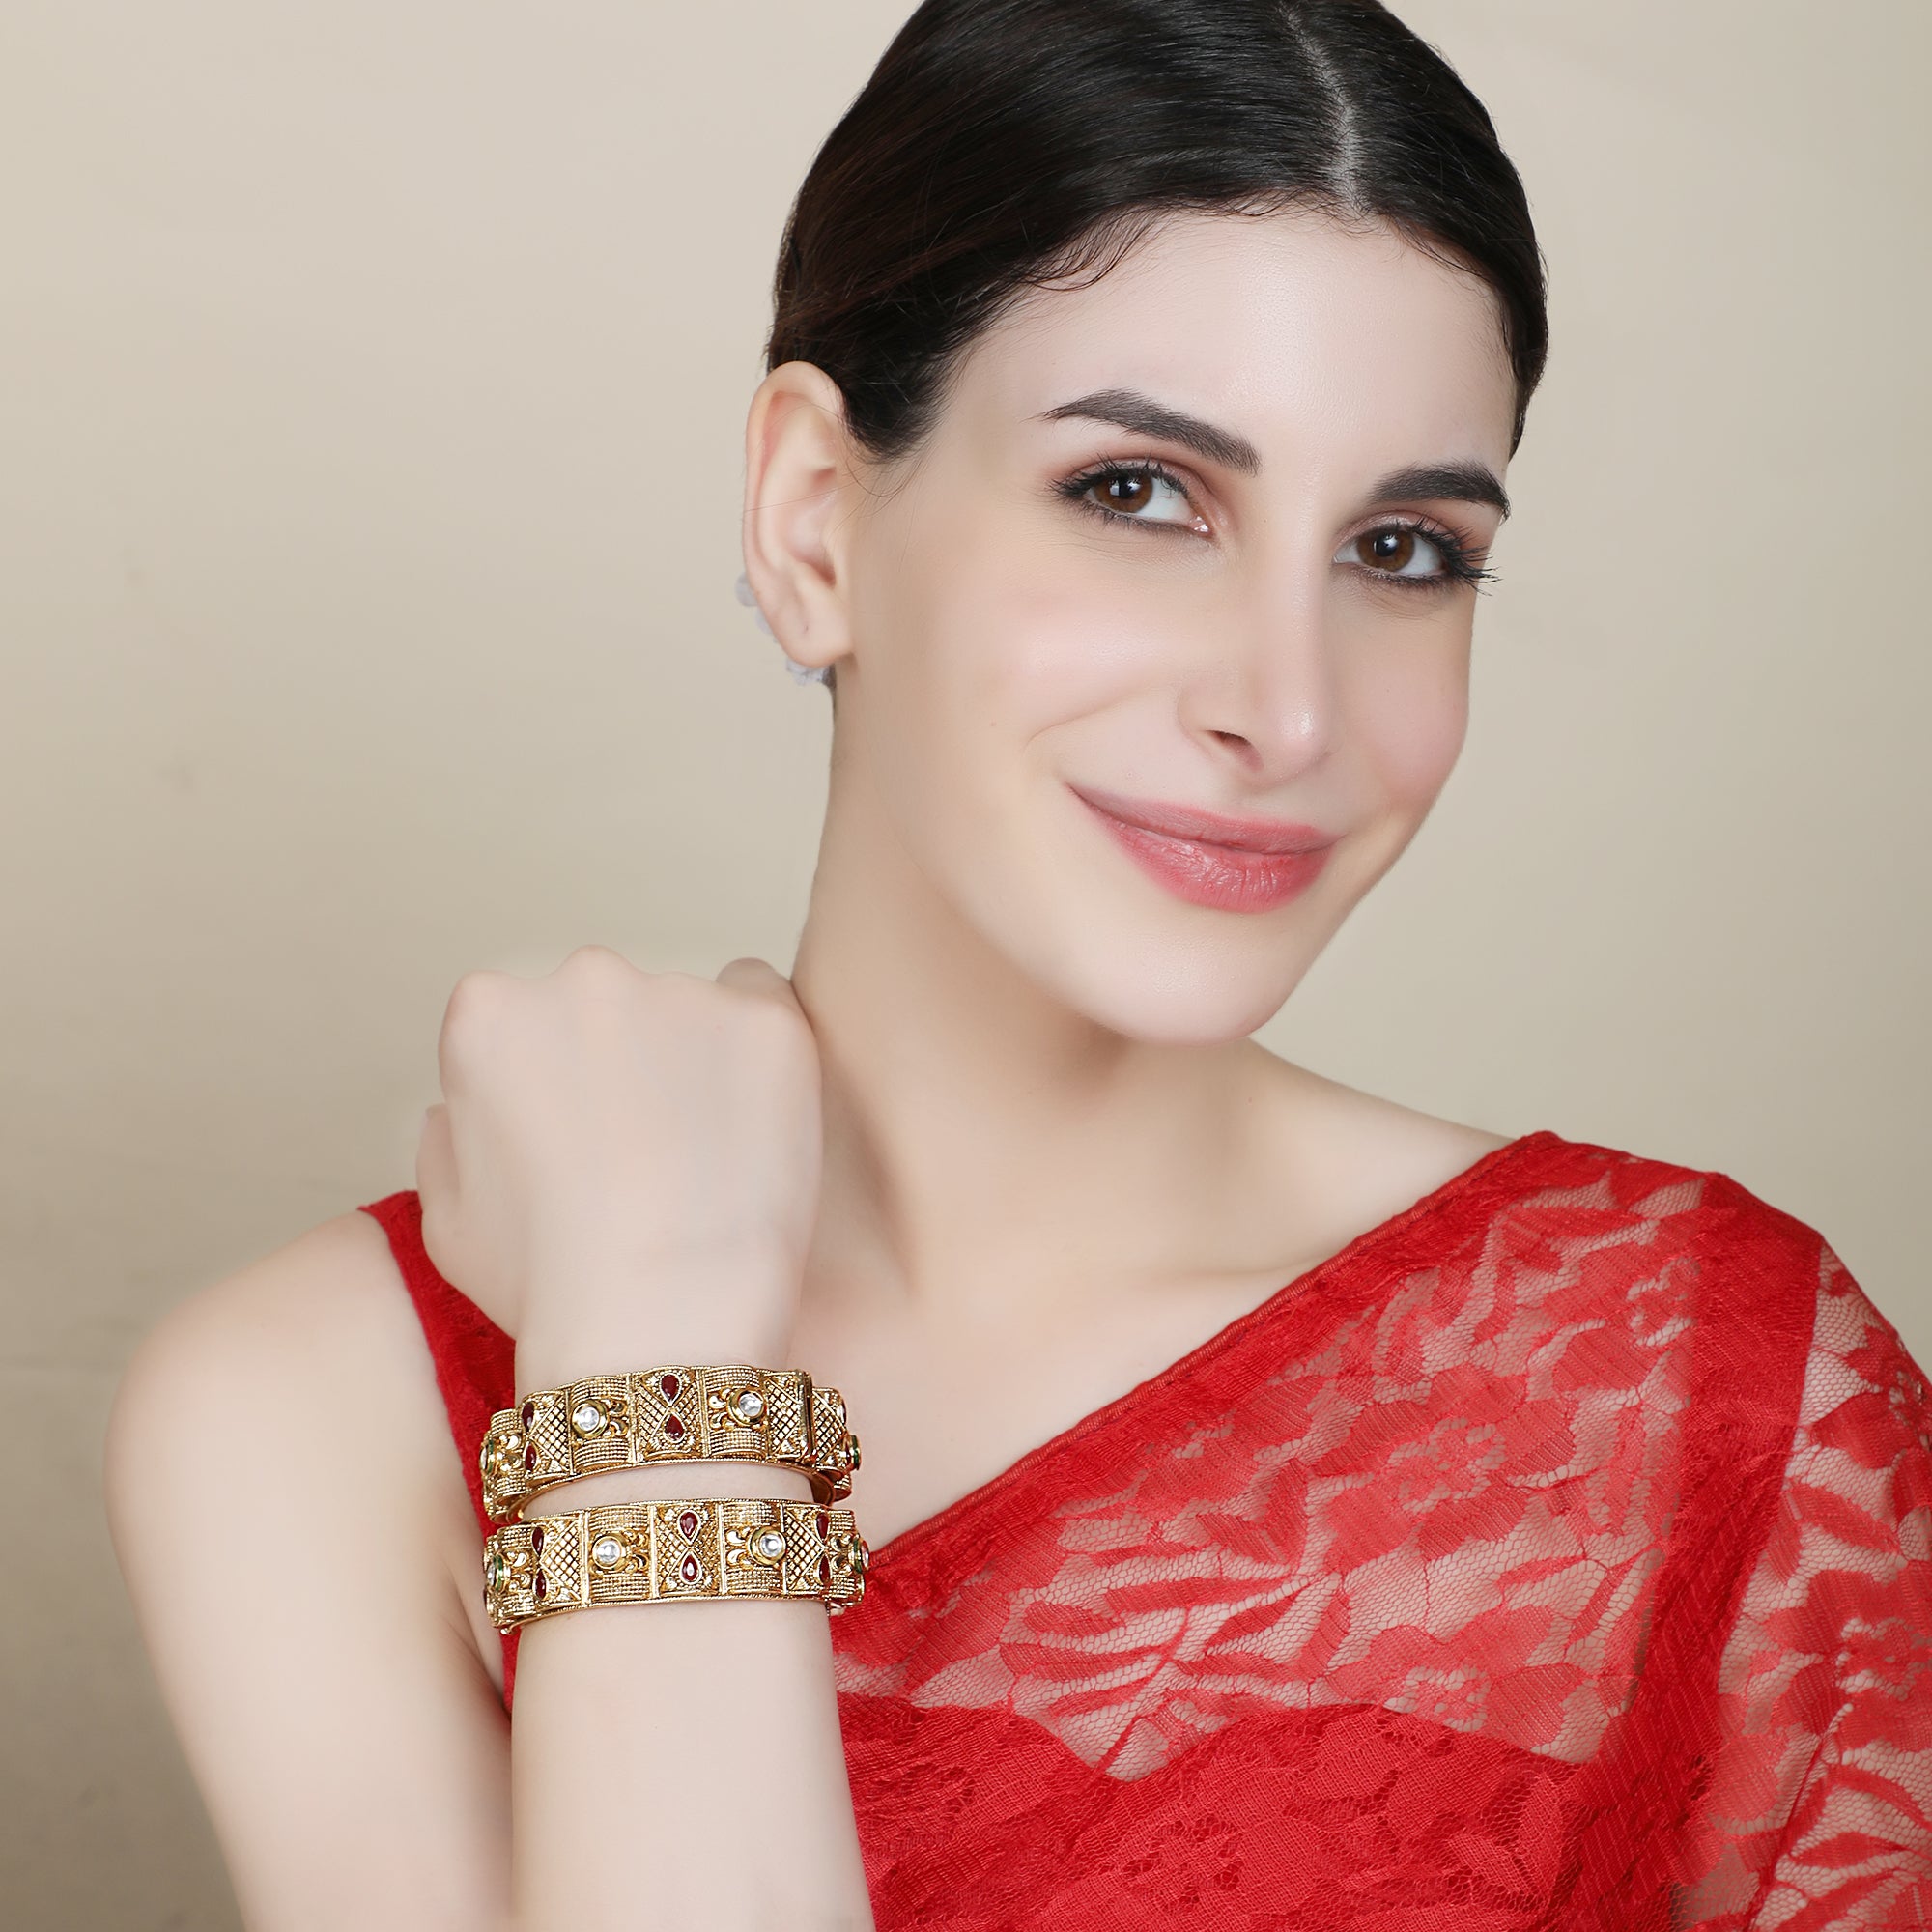 Women's Set Of 2 24 Ct Gold-Plated & Red Stone-Studded Bangles - Anikas Creation